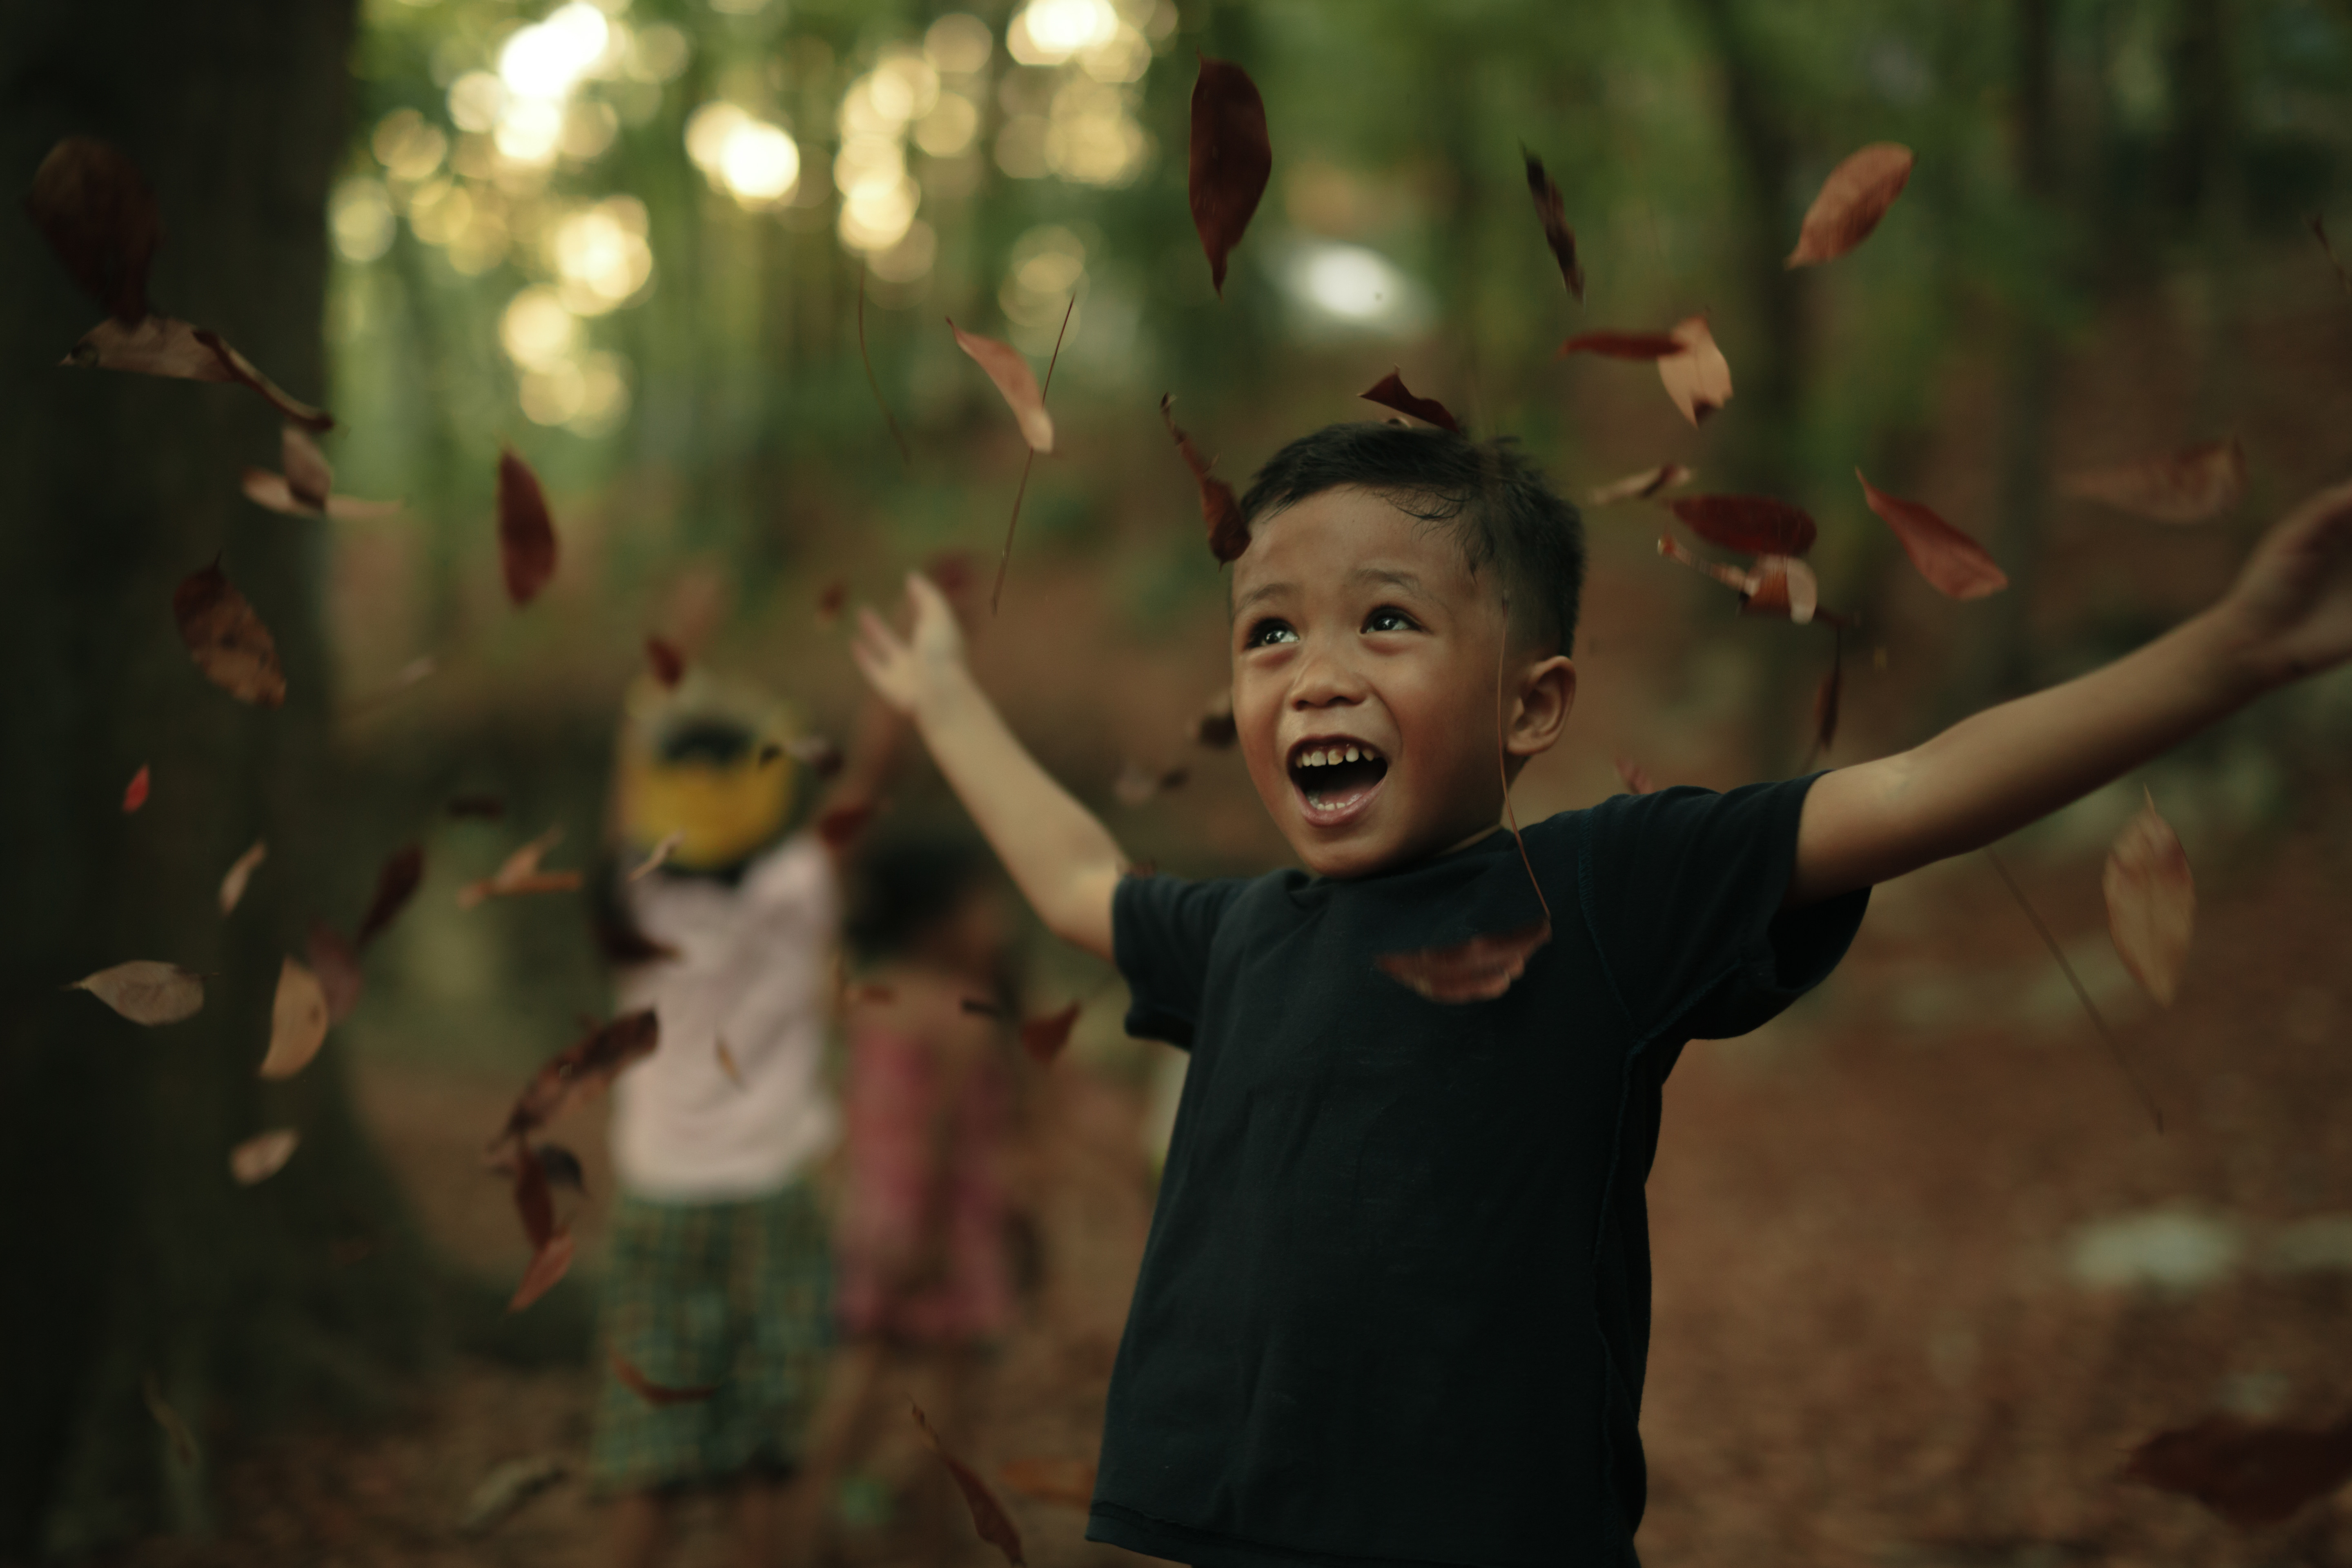 little boy throwing leaves and smiling